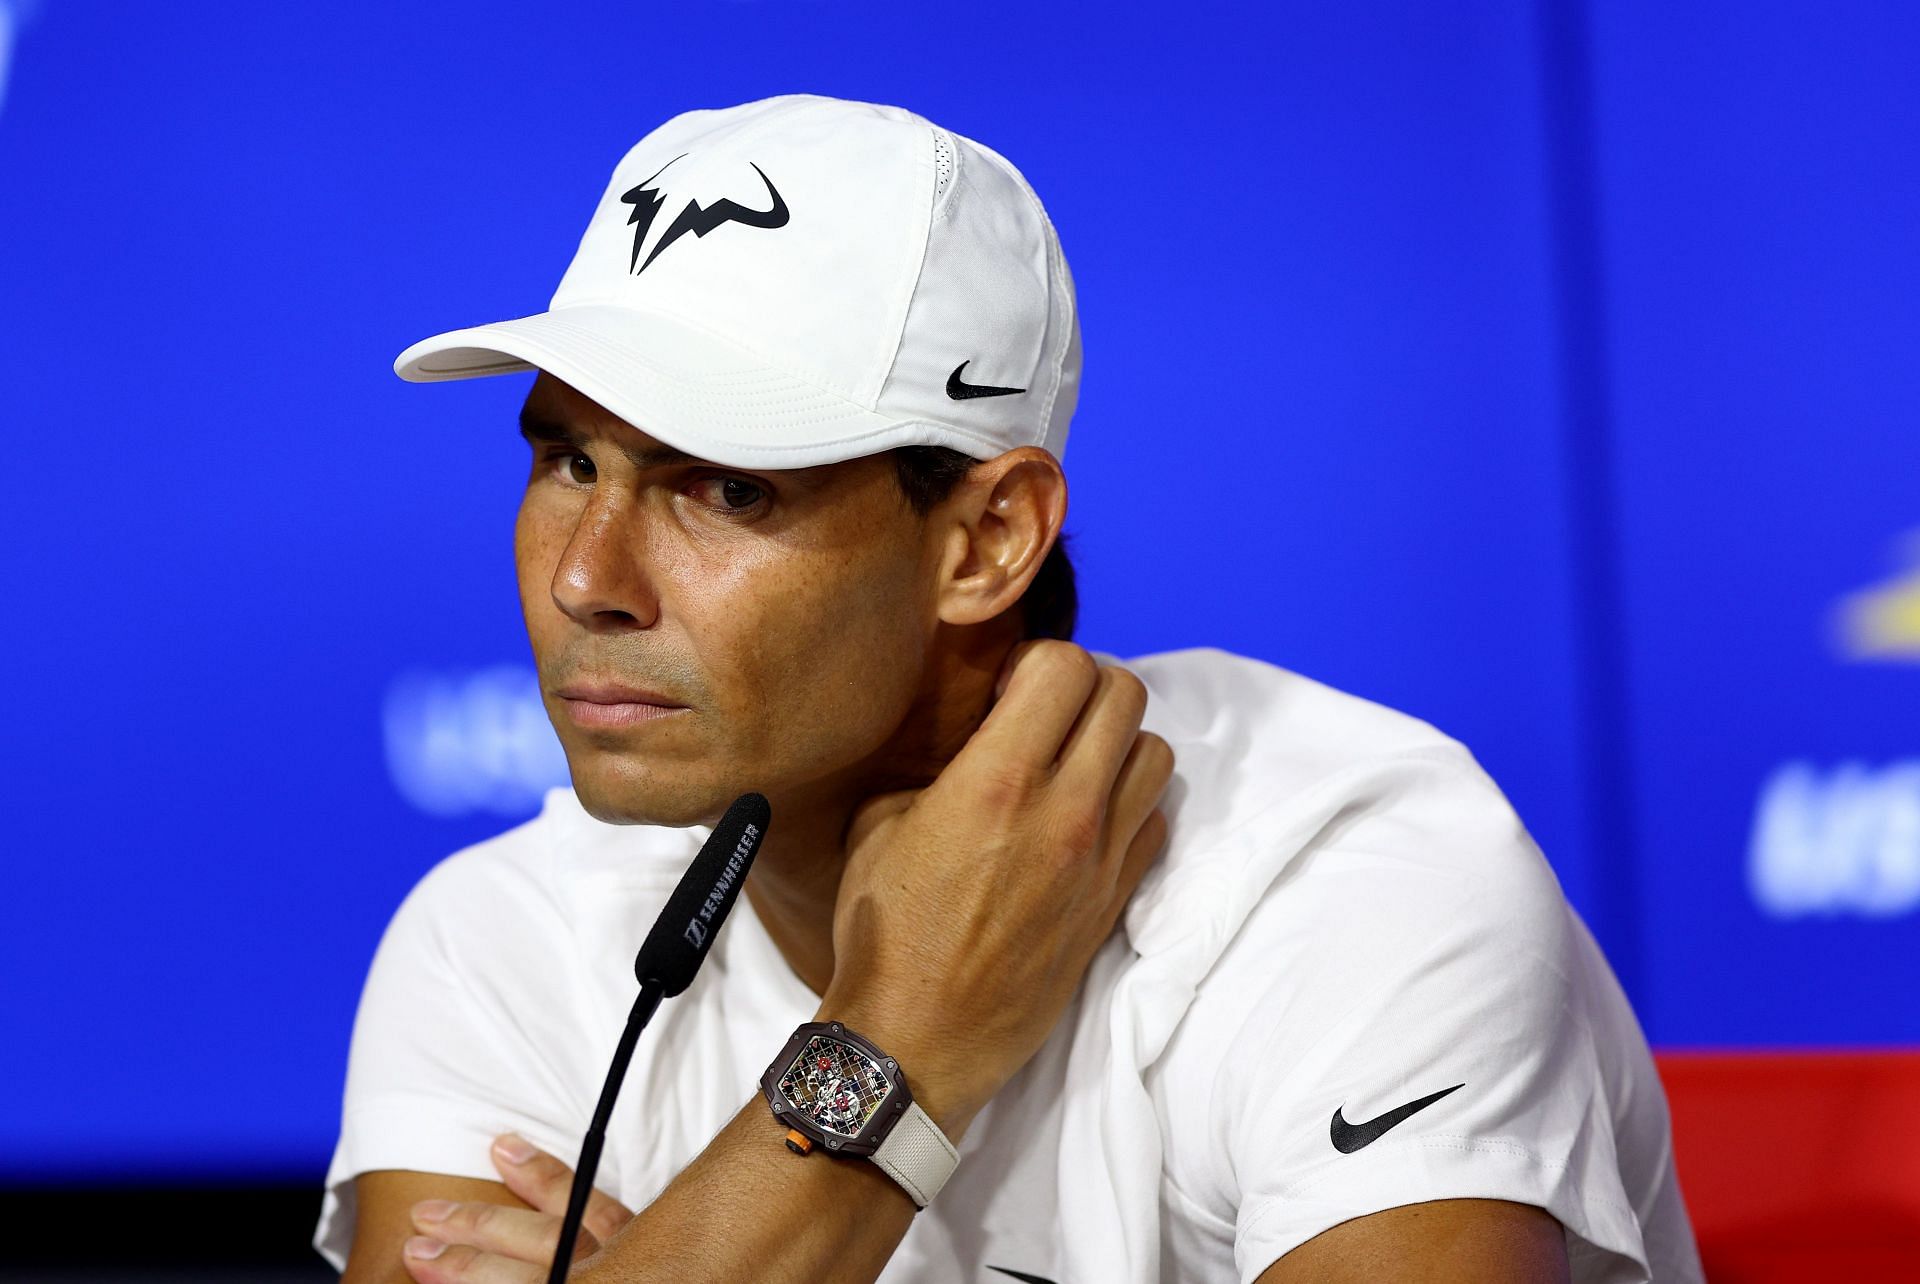 Rafael Nadal at the 2022 US Open press conference